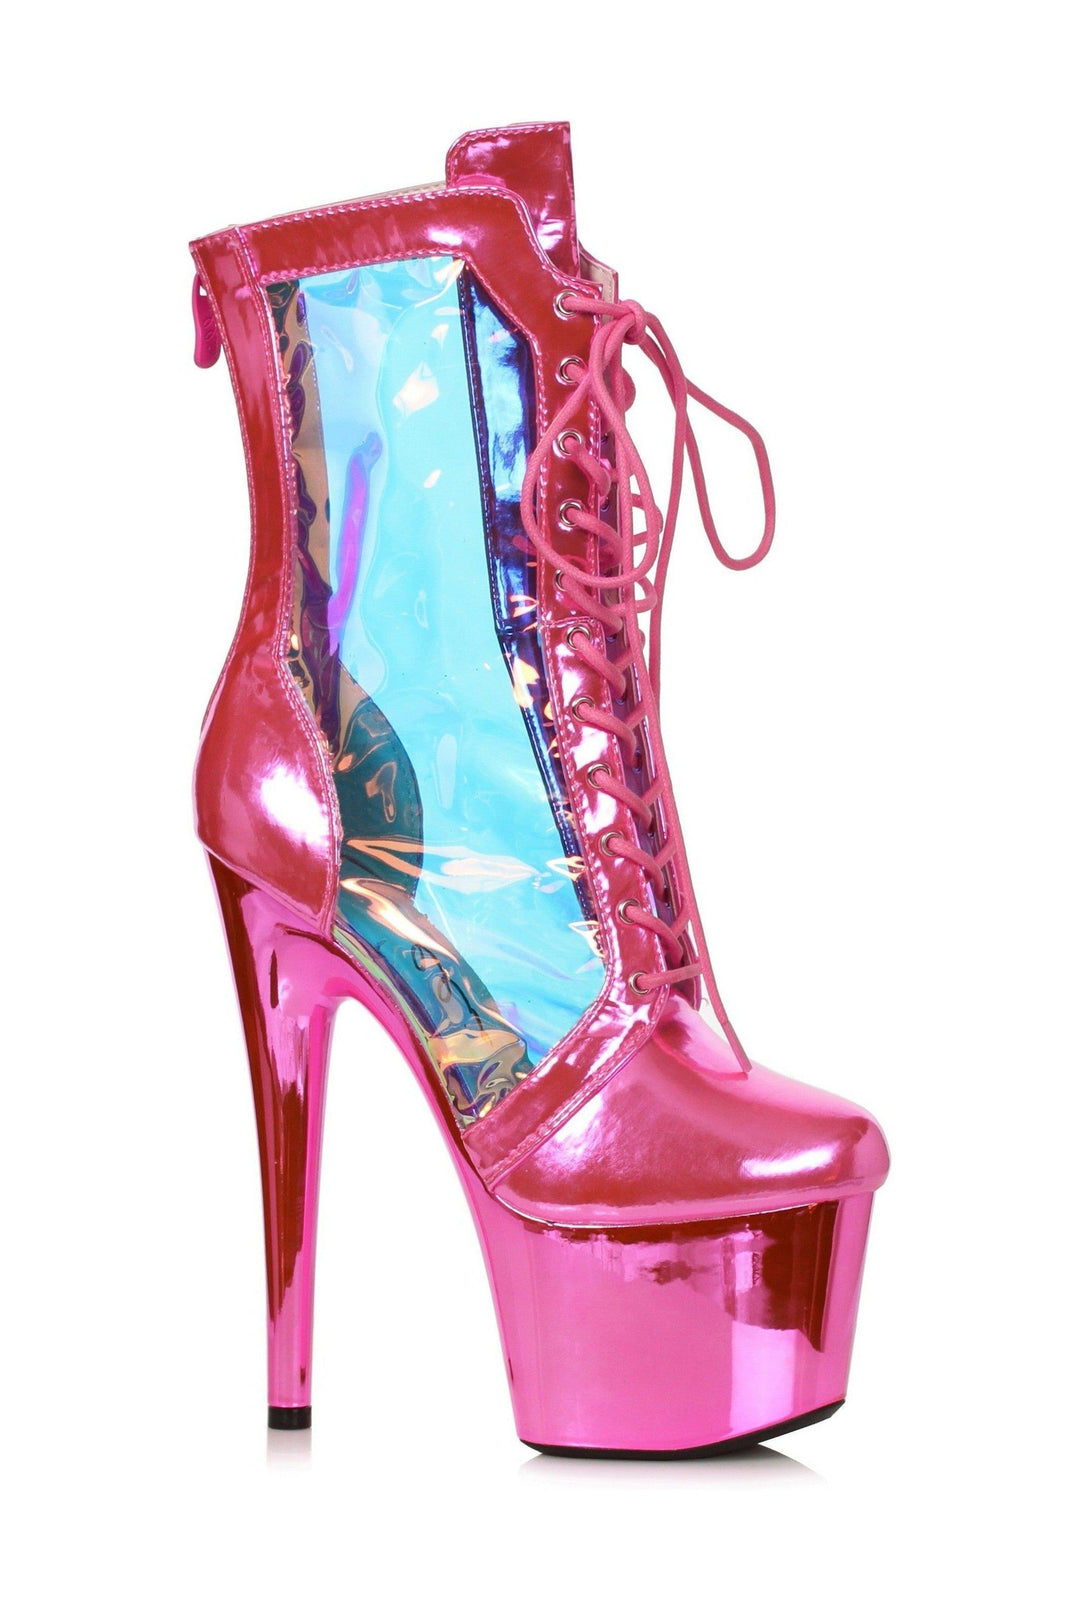 Ellie Shoes Fuchsia Ankle Boots Platform Stripper Shoes | Buy at Sexyshoes.com